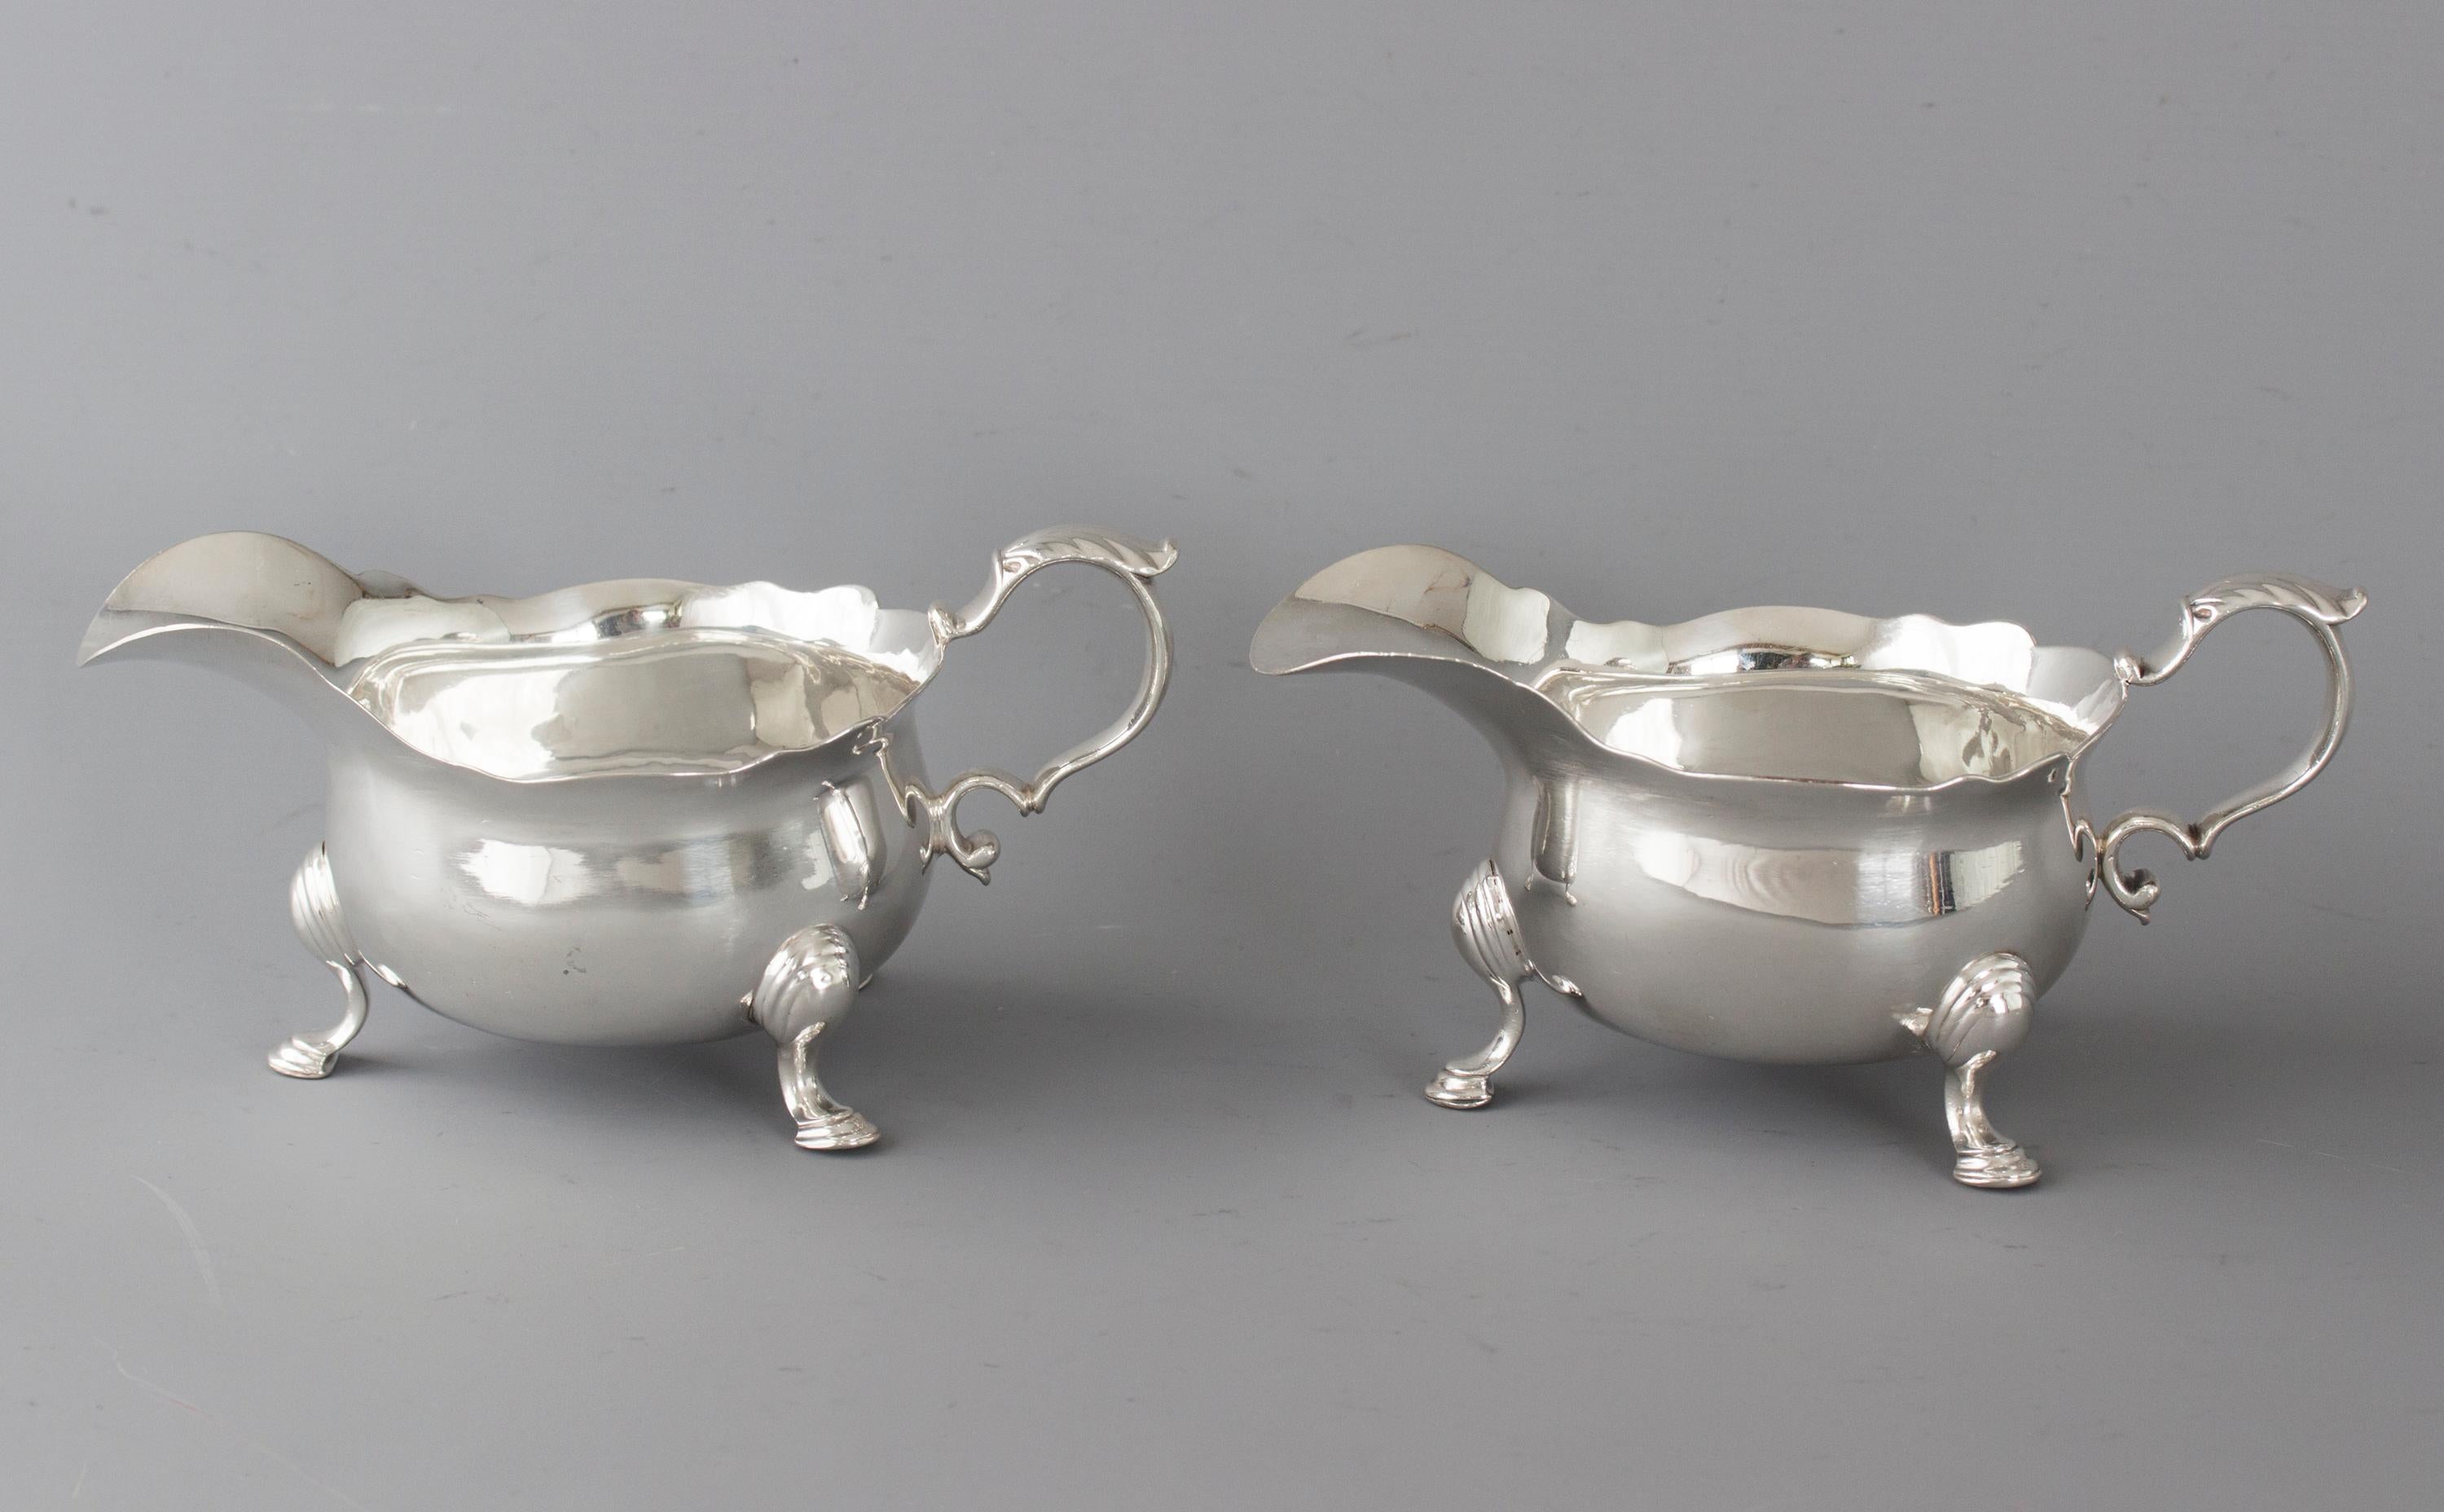 These superb silver sauce boats are of the raised circular form with extended pouring lip and applied handle surmounted with a cast acanthus leaf thumbpiece. The body bellied with a cut wavy rim. All standing on three cast legs decorated with hoof